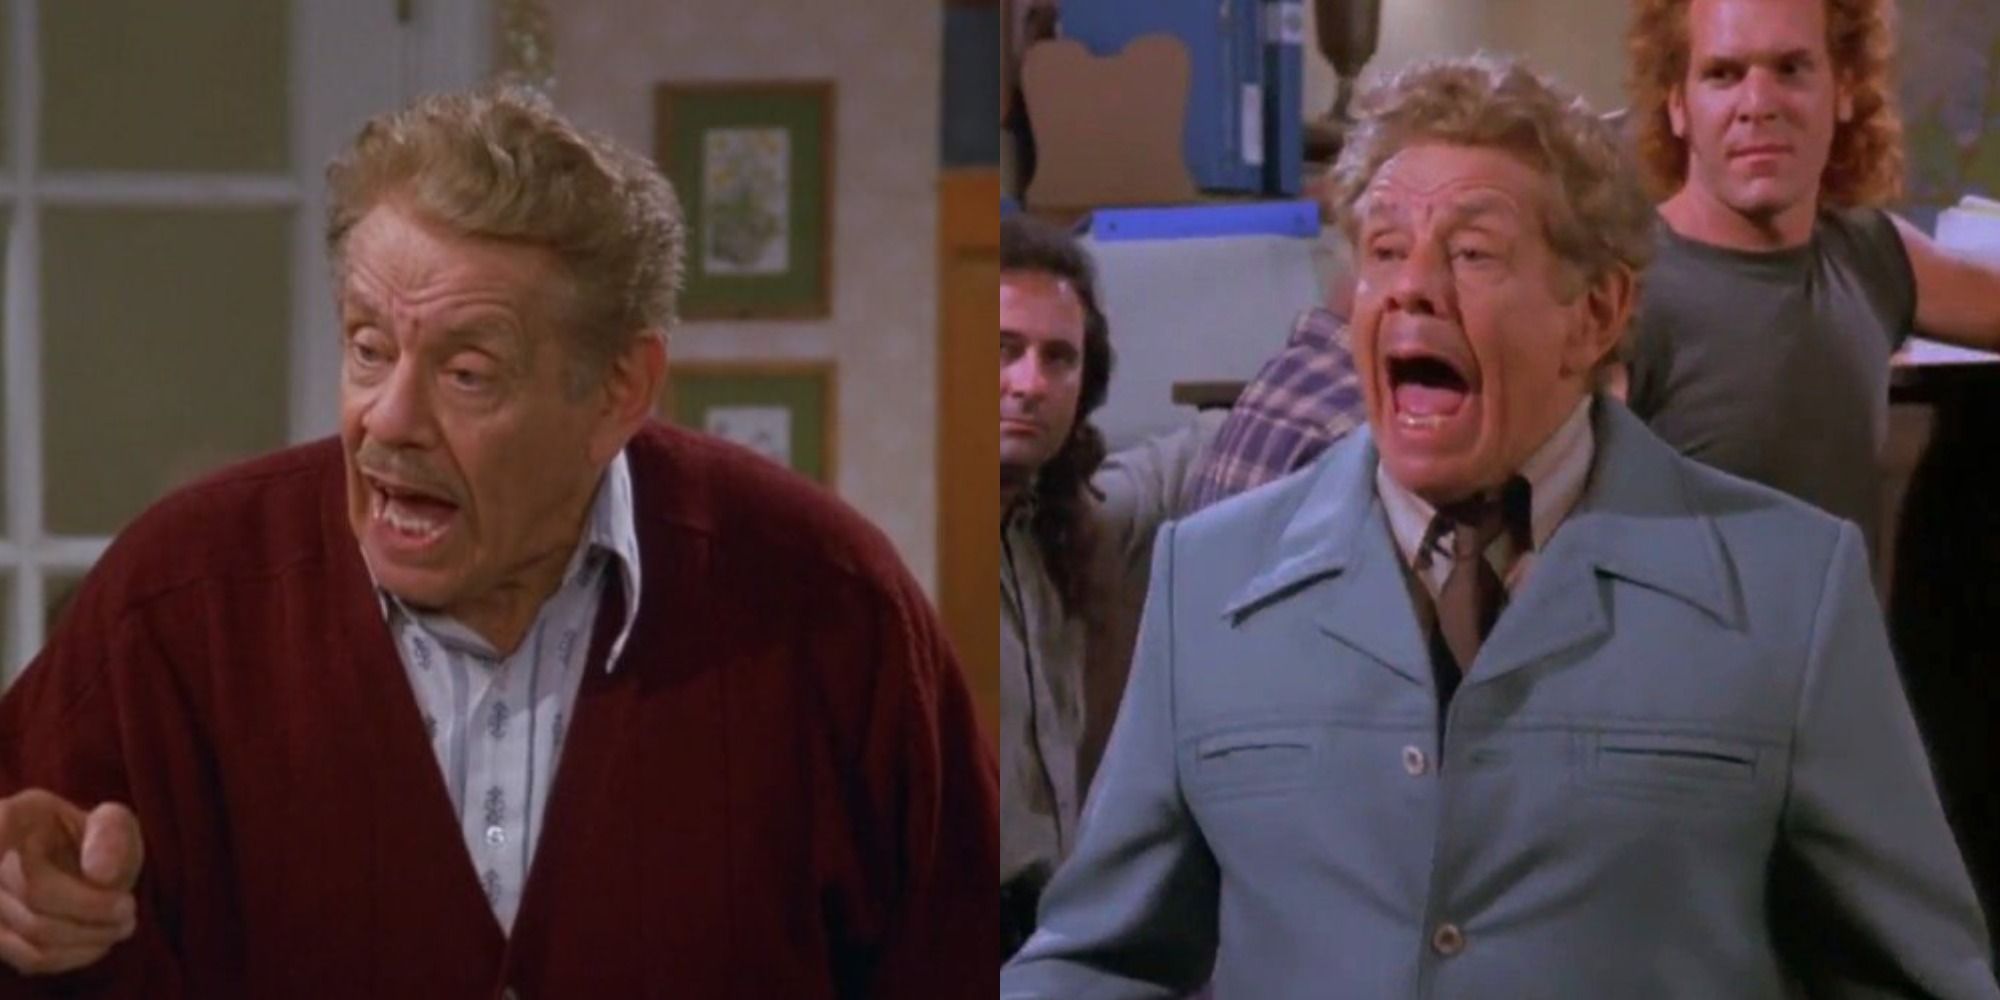 Split image showing Frank Costanza talking and screaming in Seinfeld